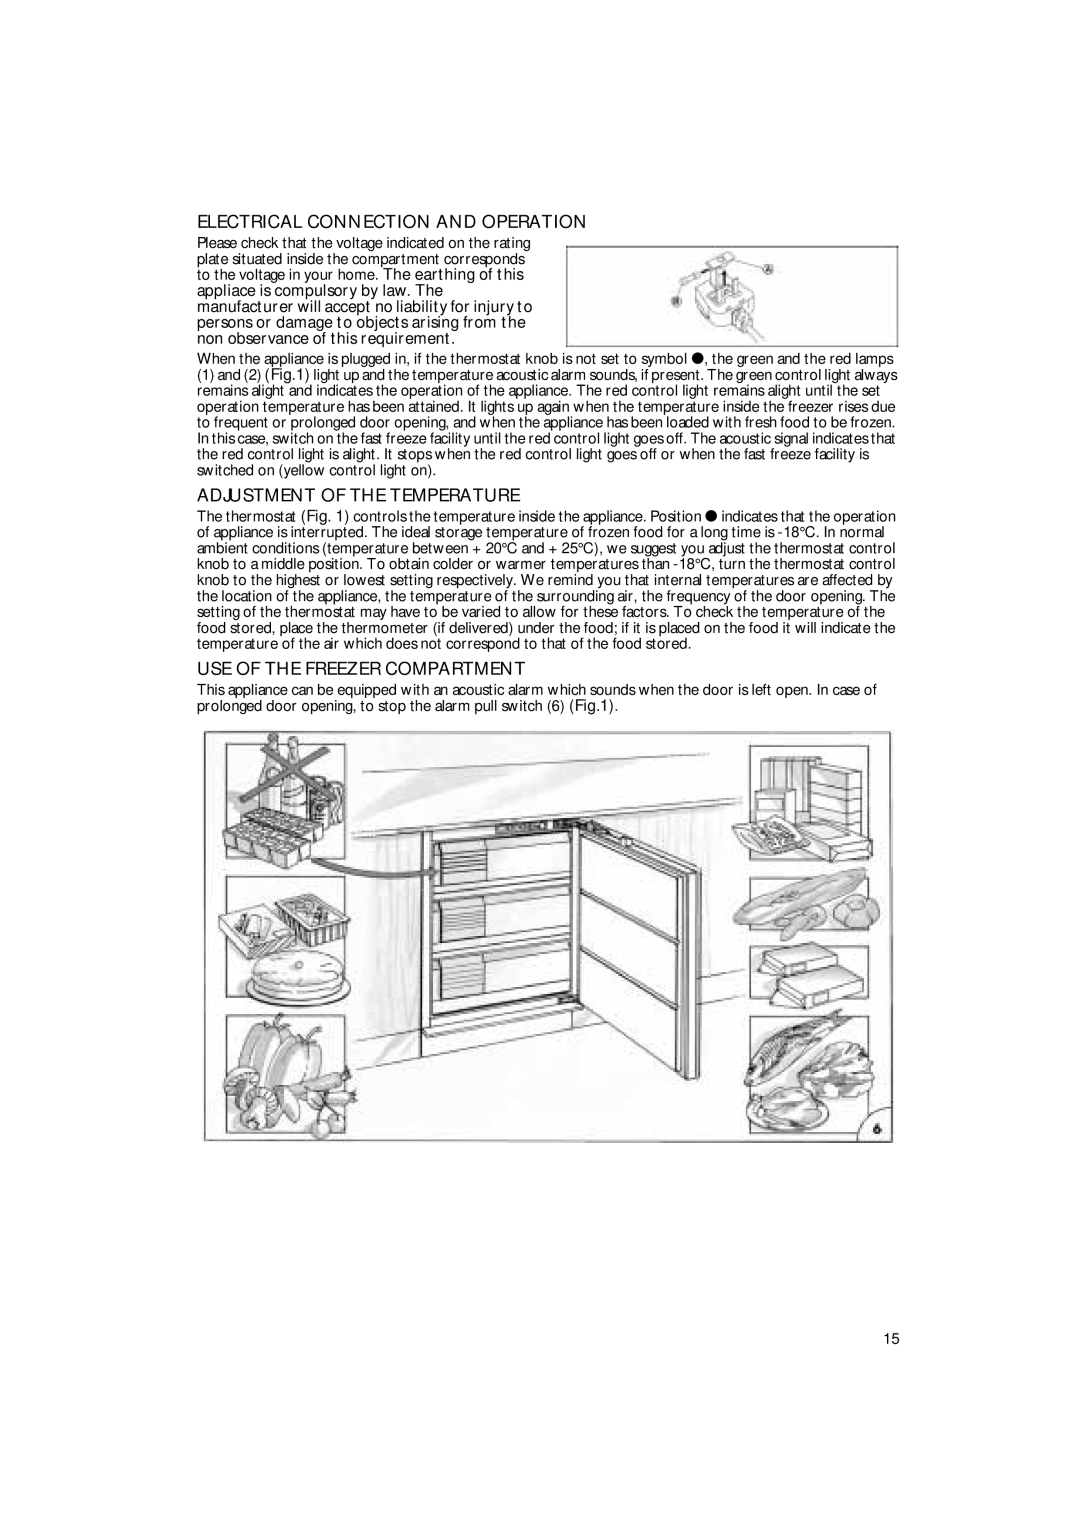 Smeg VR115B1 manual Electrical Connection And Operation, Adjustment Of The Temperature, Use Of The Freezer Compartment 